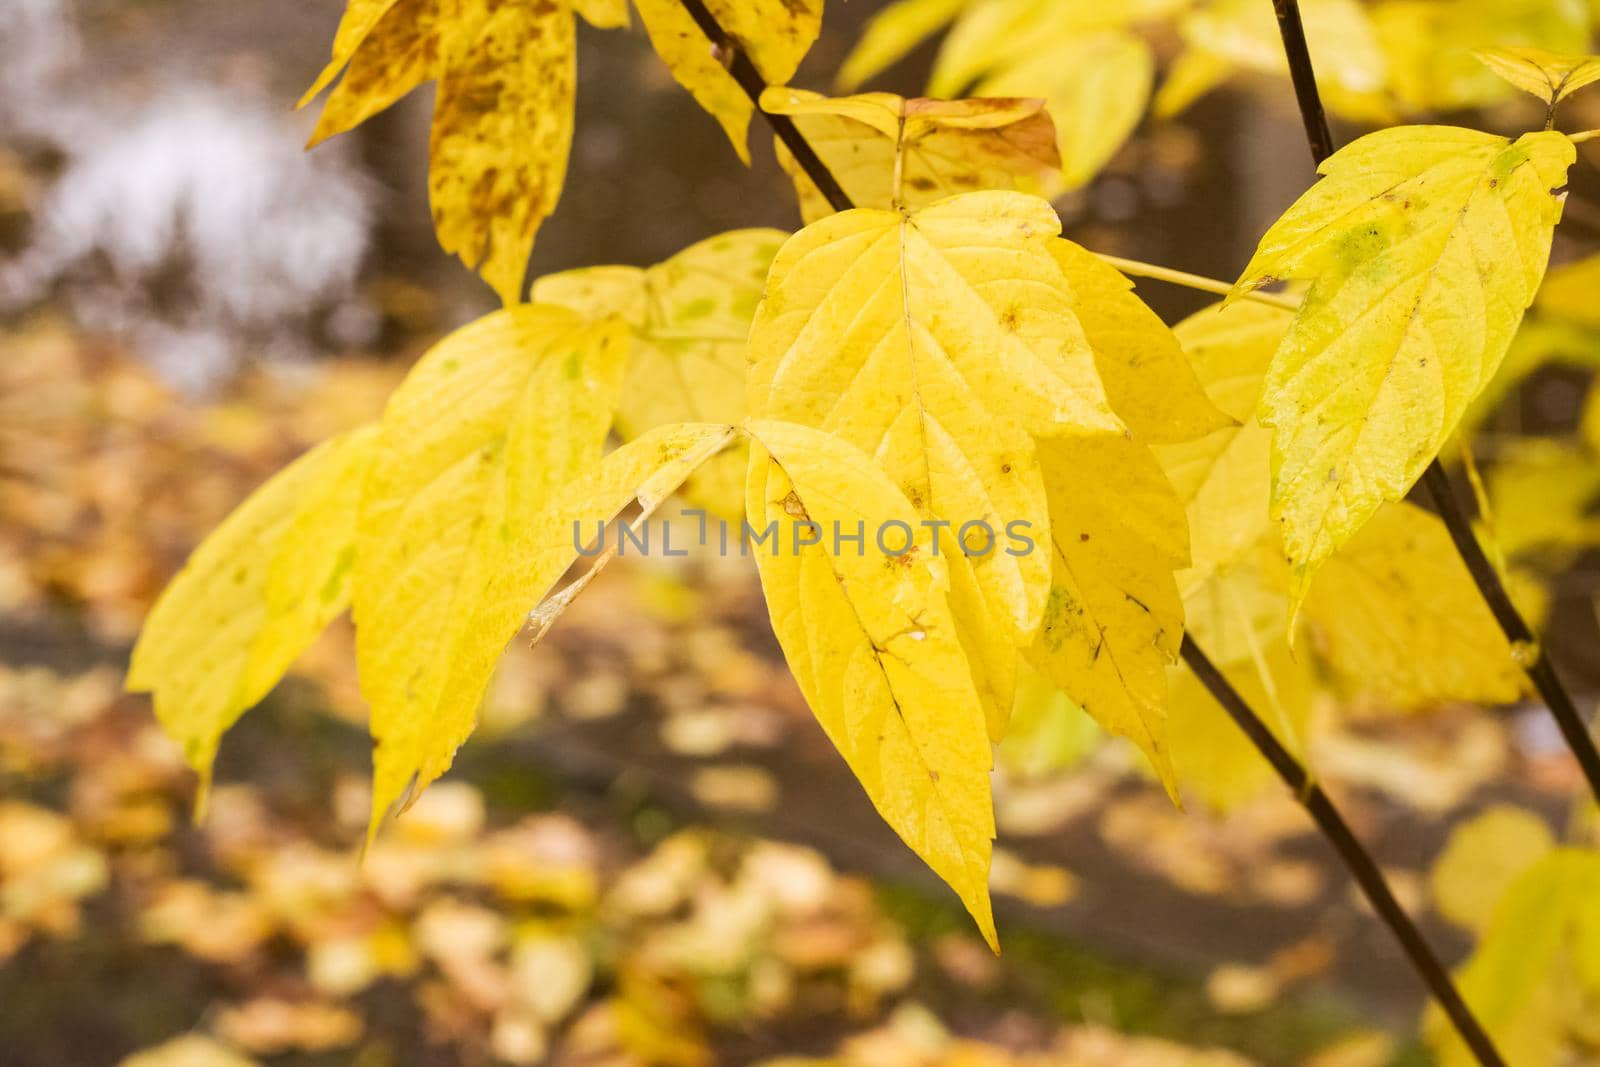 Yellow leaves on tree branches with dew drops by Vera1703